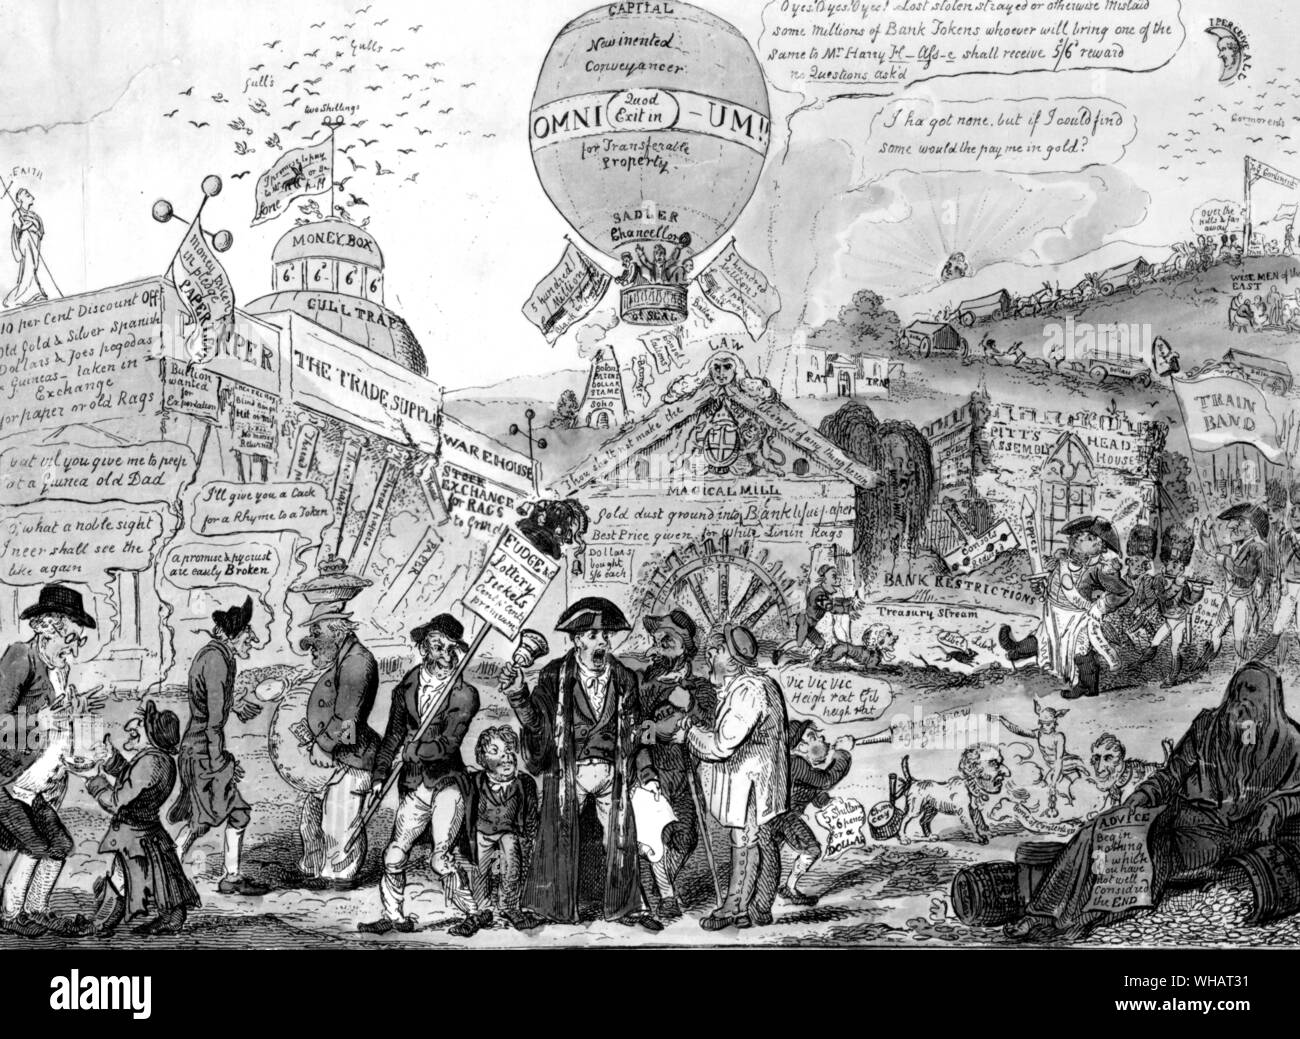 A design for Threadneedle Case. The Land of Promise!. A satire on the various schemes for gulling the public, by the lottery companies etc. and showing the dissatisfaction of the country with the paper currency. Sir William Curtis figures in the throng with other wellknown spectators. by G Cruikshank. Marcj 1811 Stock Photo